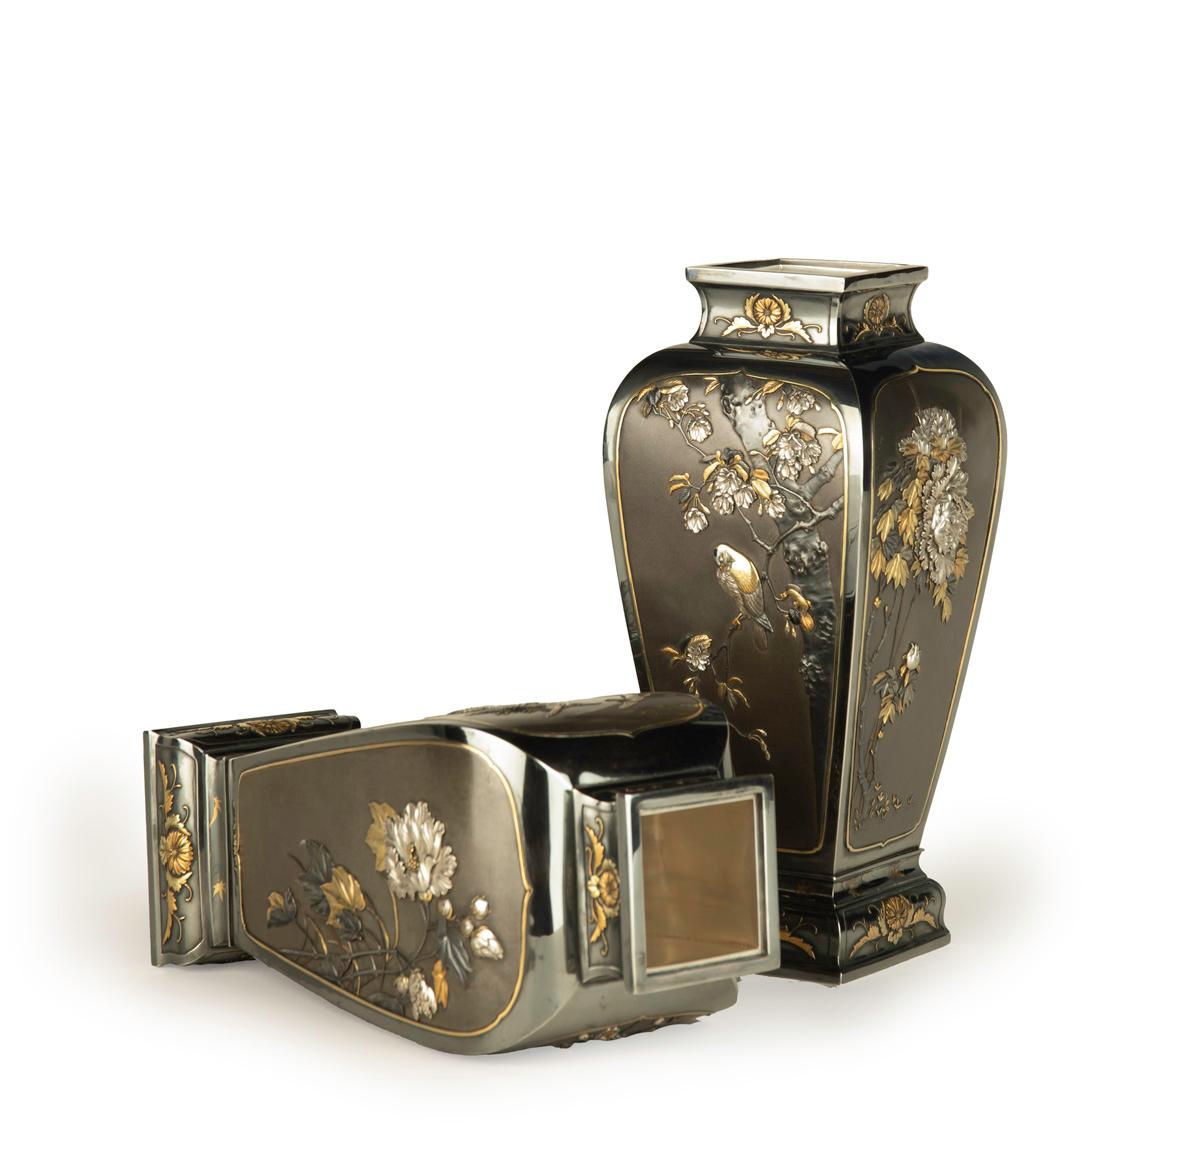 As part of our Japanese works of art exhibition we are delighted to offer this exceptional quality pair of Meiji Period (1868-1912)  mixed metal vases. The vases are formed from pure silver with each vase housing four shaped shibuichi panels